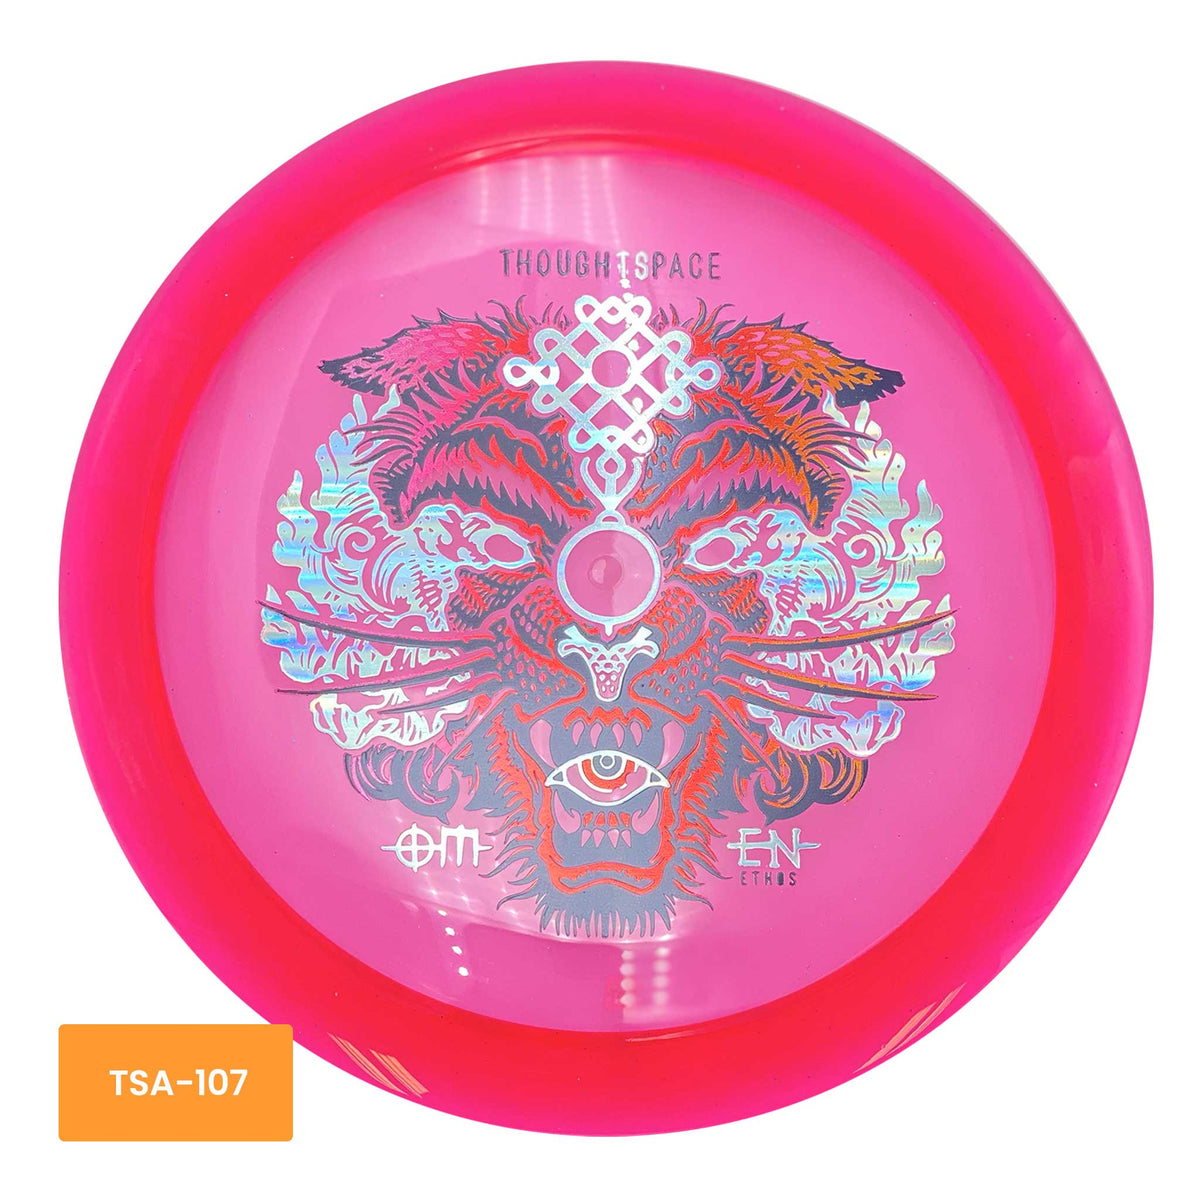 Thought Space Athletics Ethos Omen driver - Pink